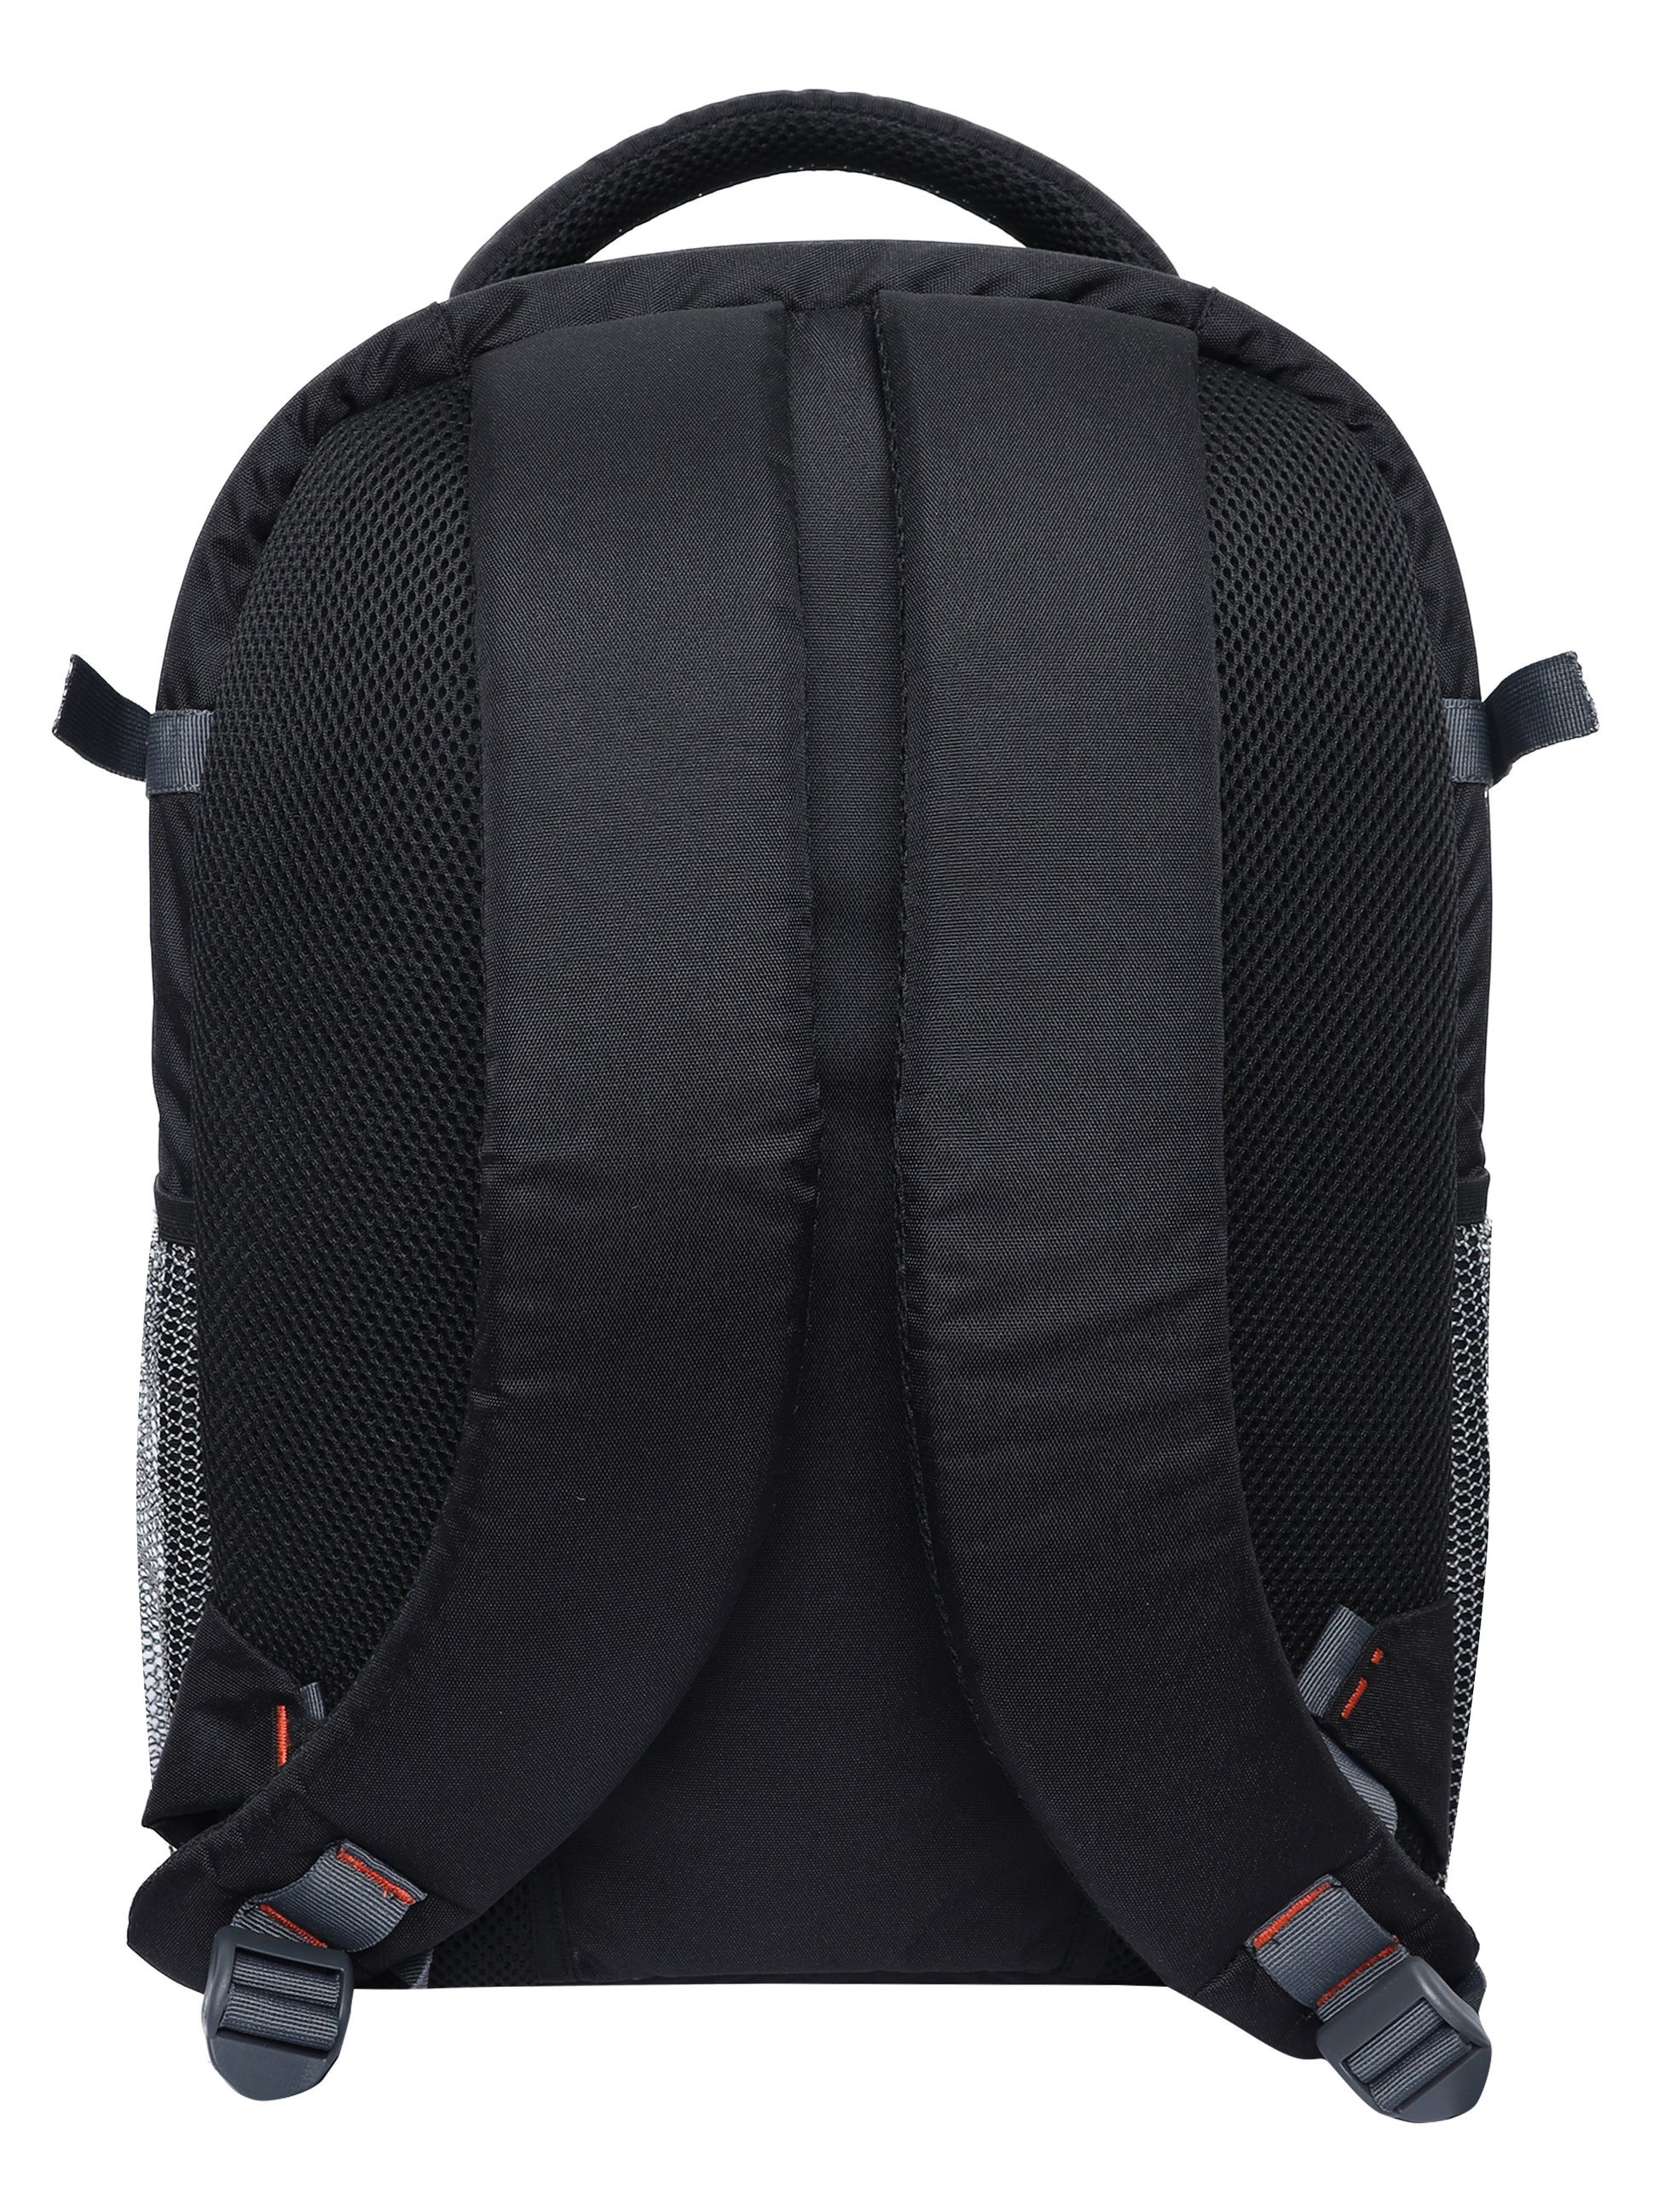 Back view of the G9 Super Tank 1 video camera backpack, featuring padded shoulder straps and a weight distribution system for comfortable carrying